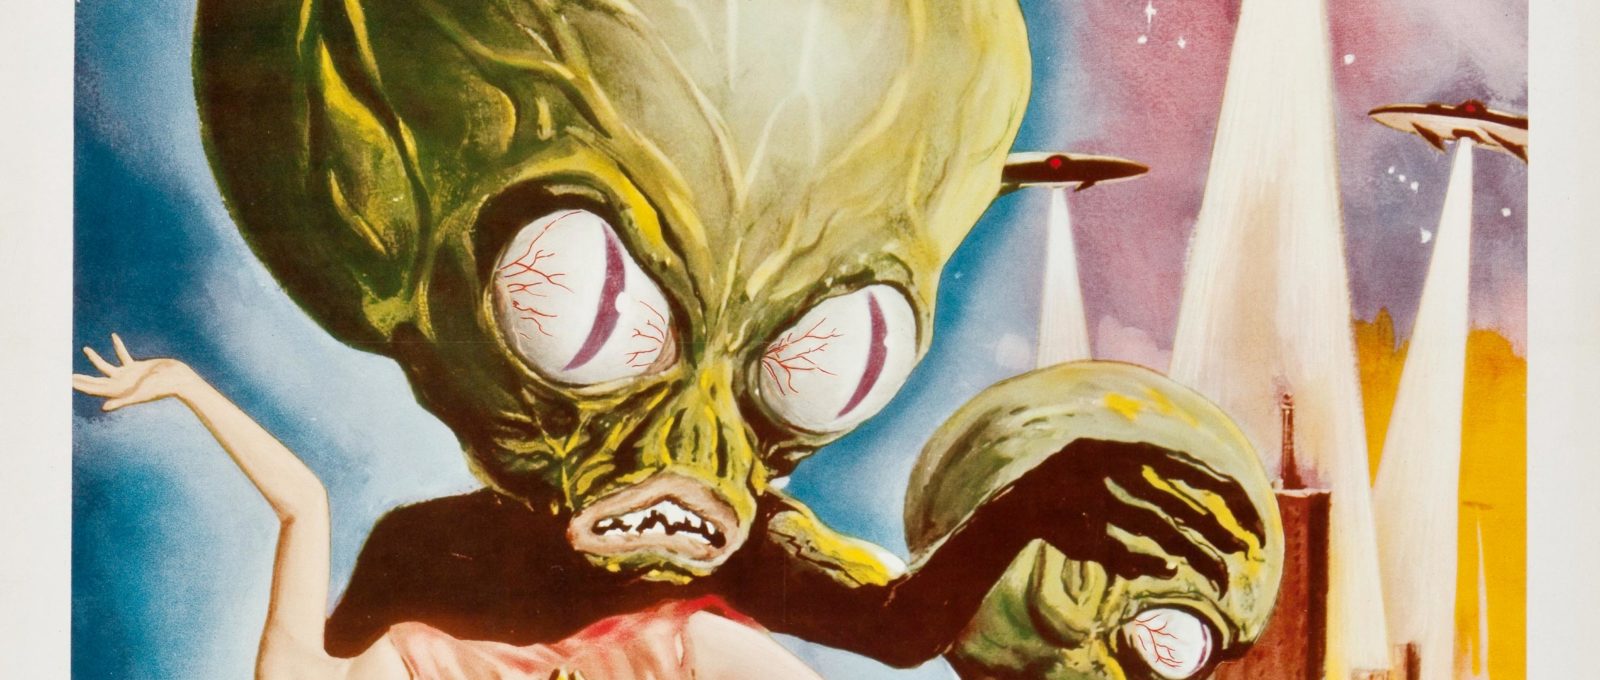 Invasion of the Saucer Men movie poster